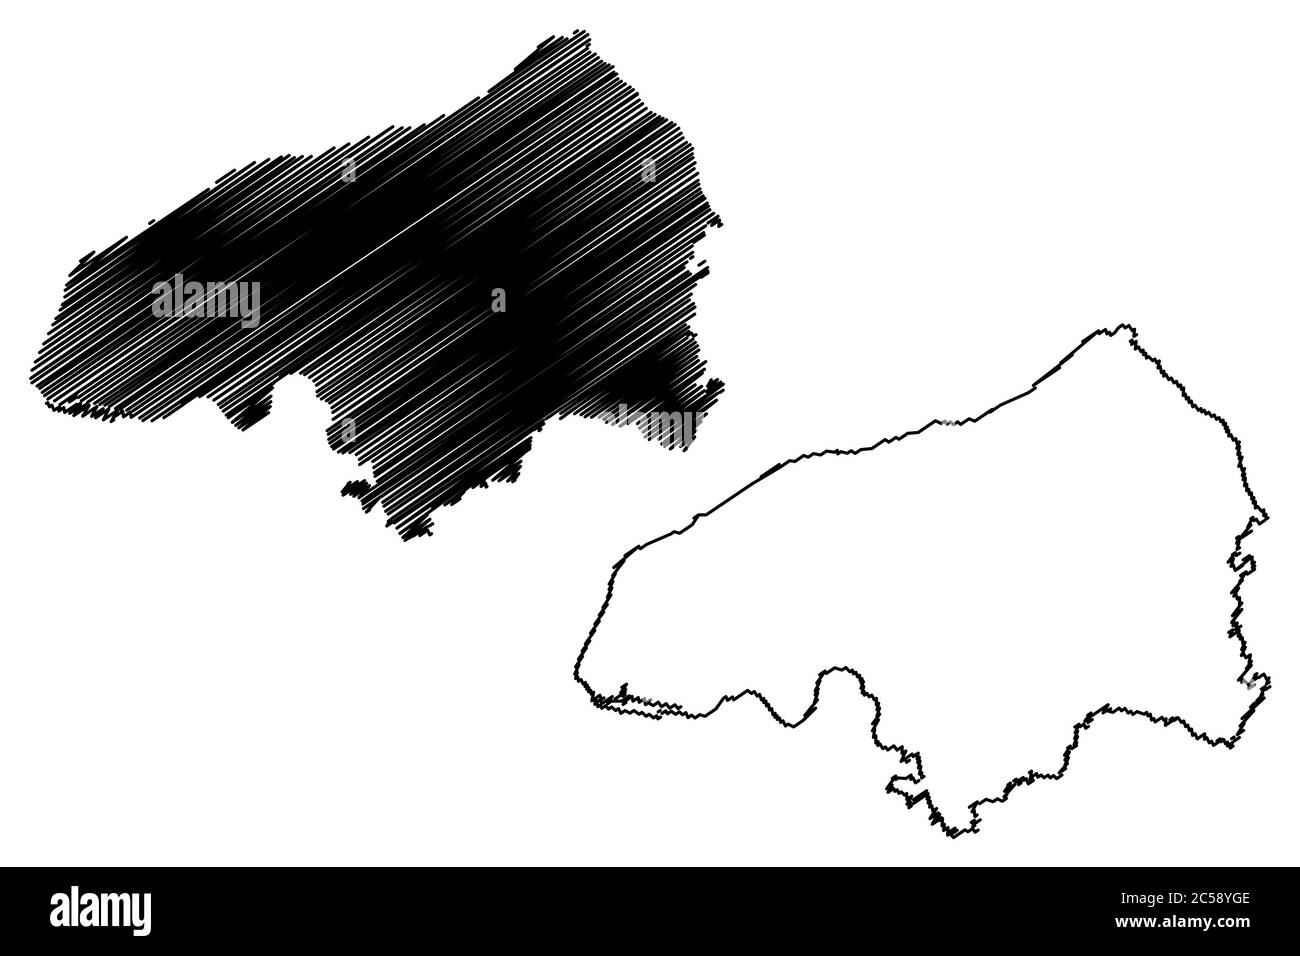 Normandie map Black and White Stock Photos & Images - Alamy